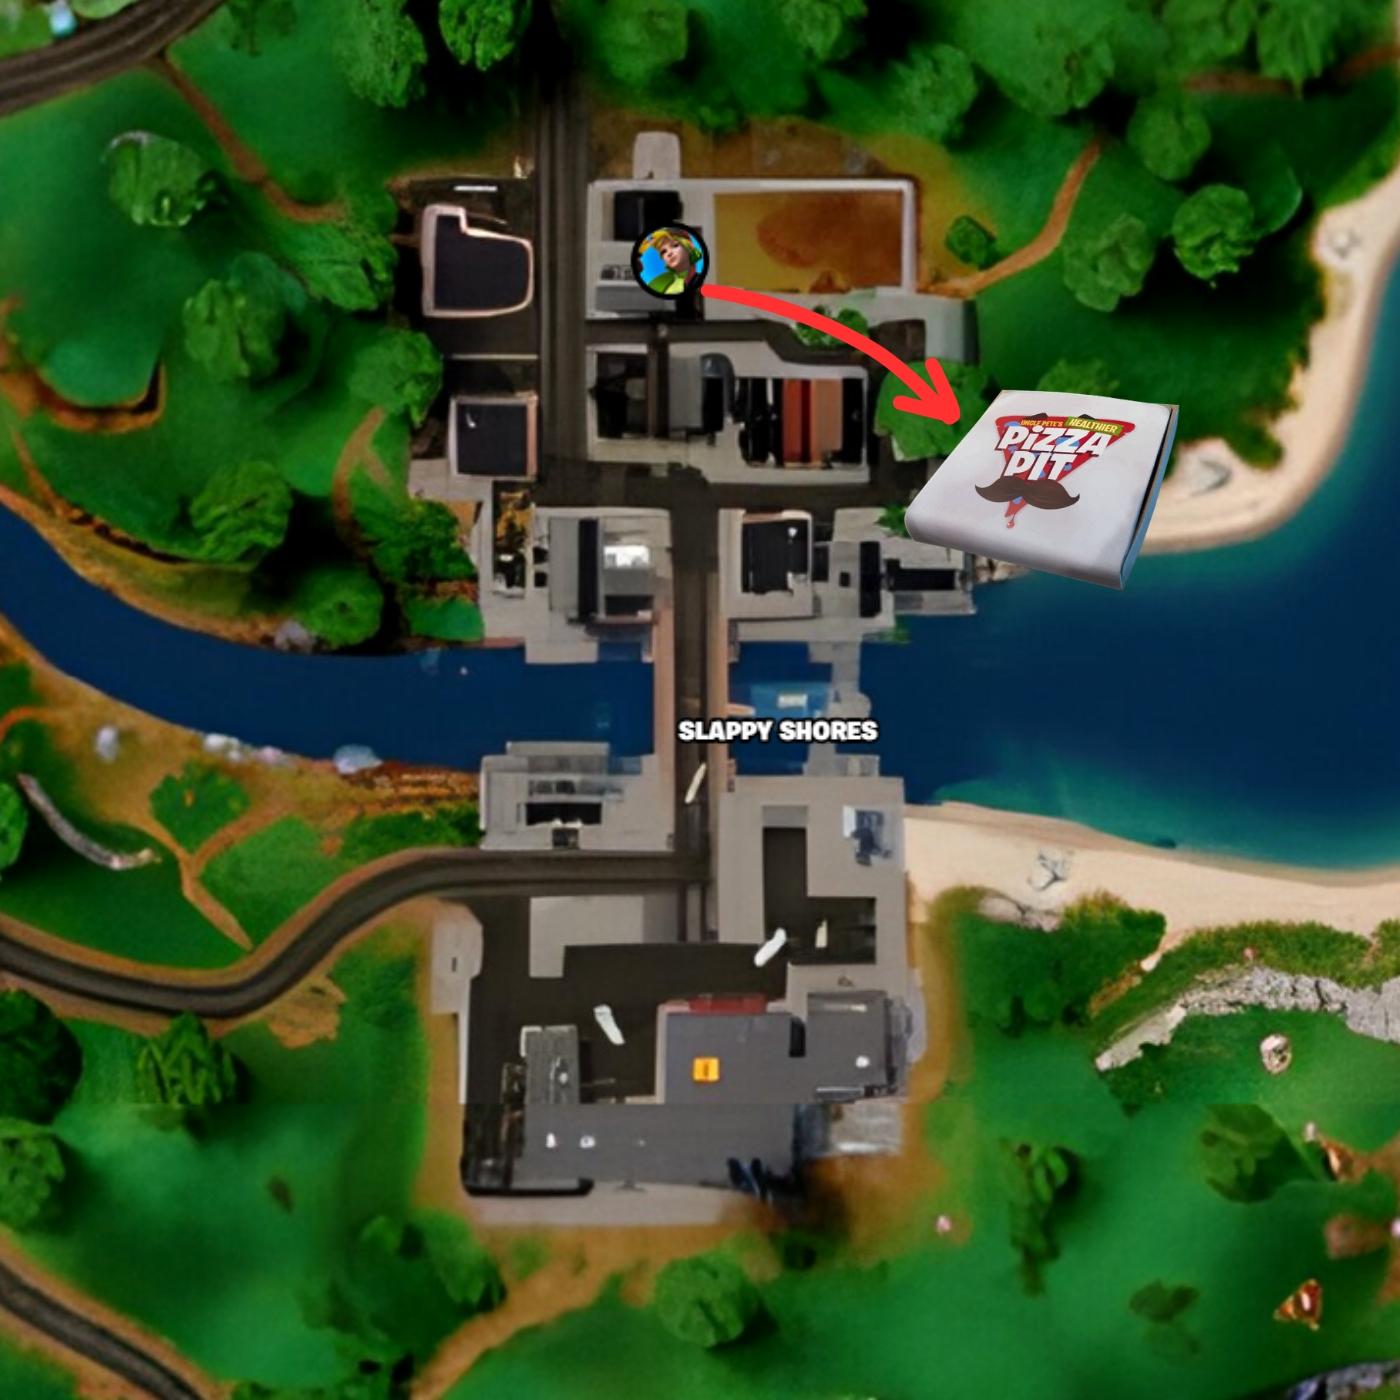 Pizza Party location on the Fortnite Ch4S4 map